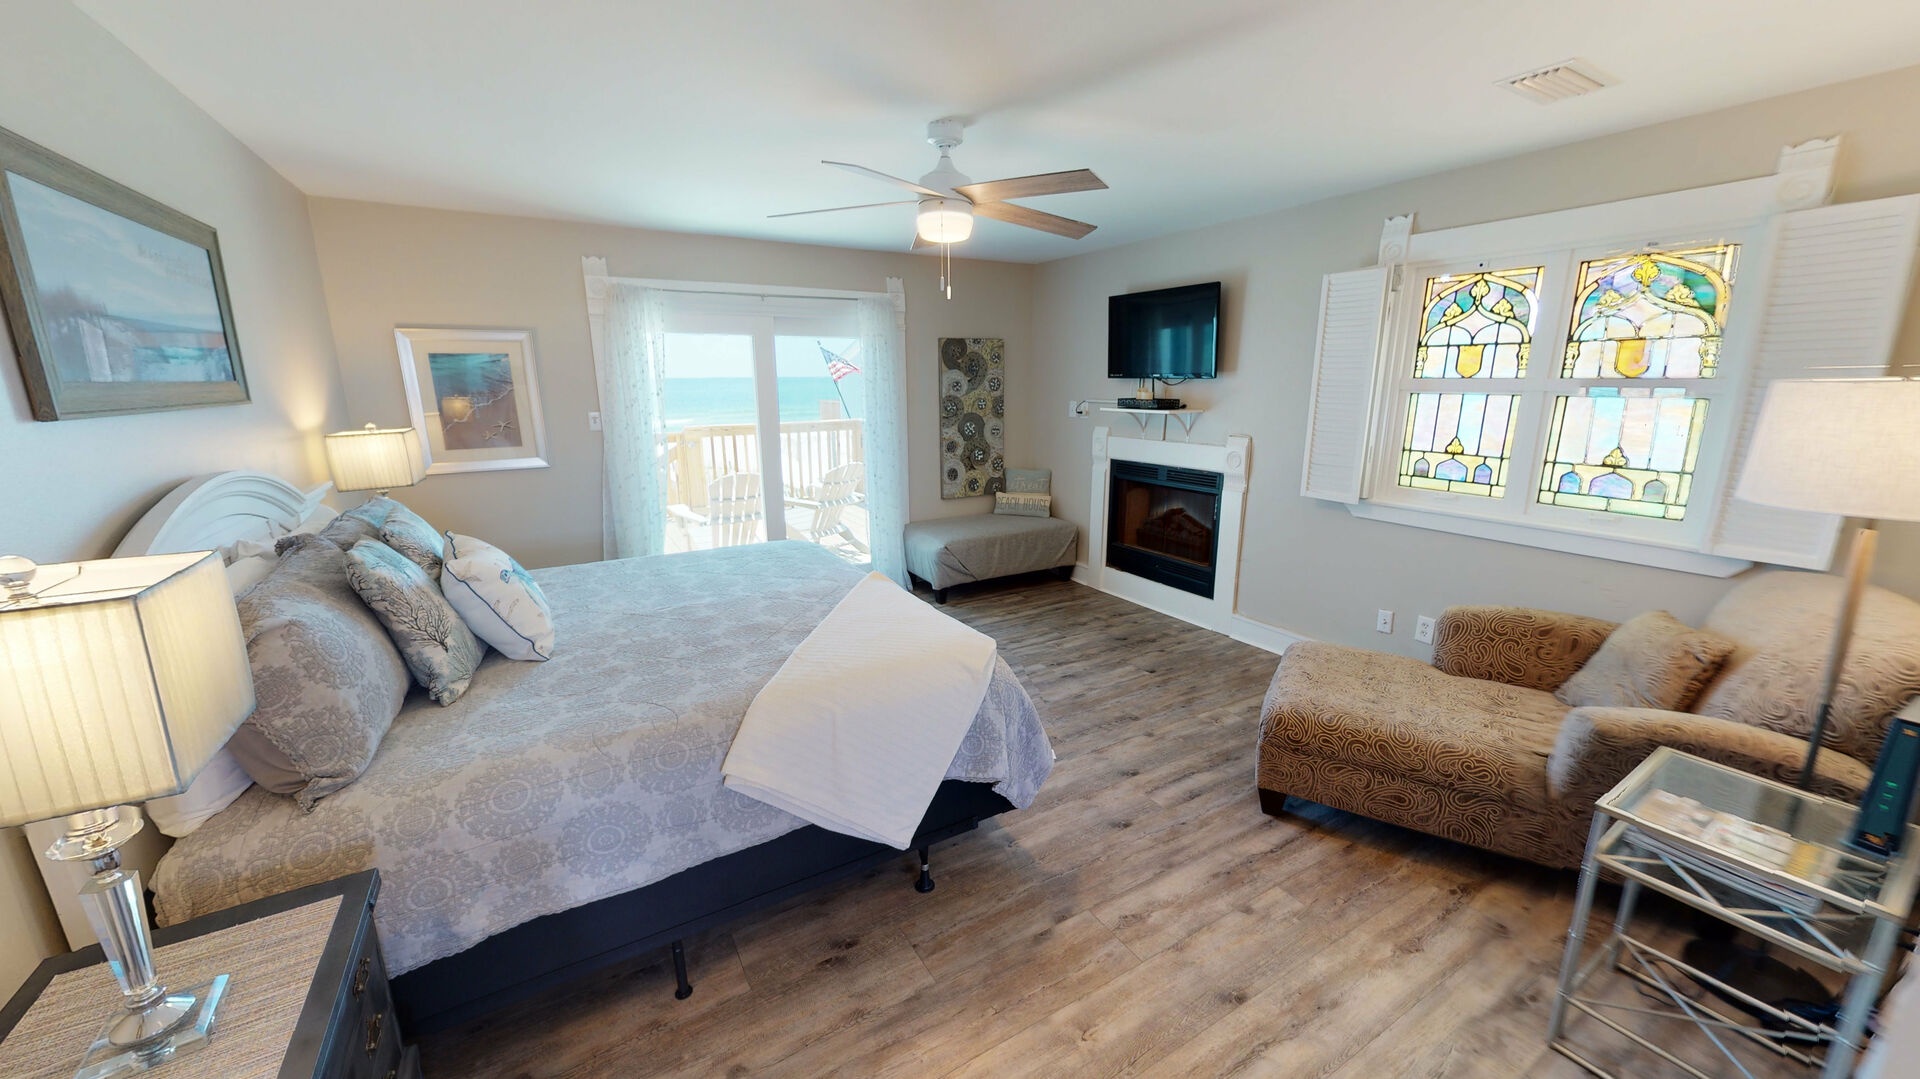 Master bedroom has a king bed, TV, Gulf views from a private deck access